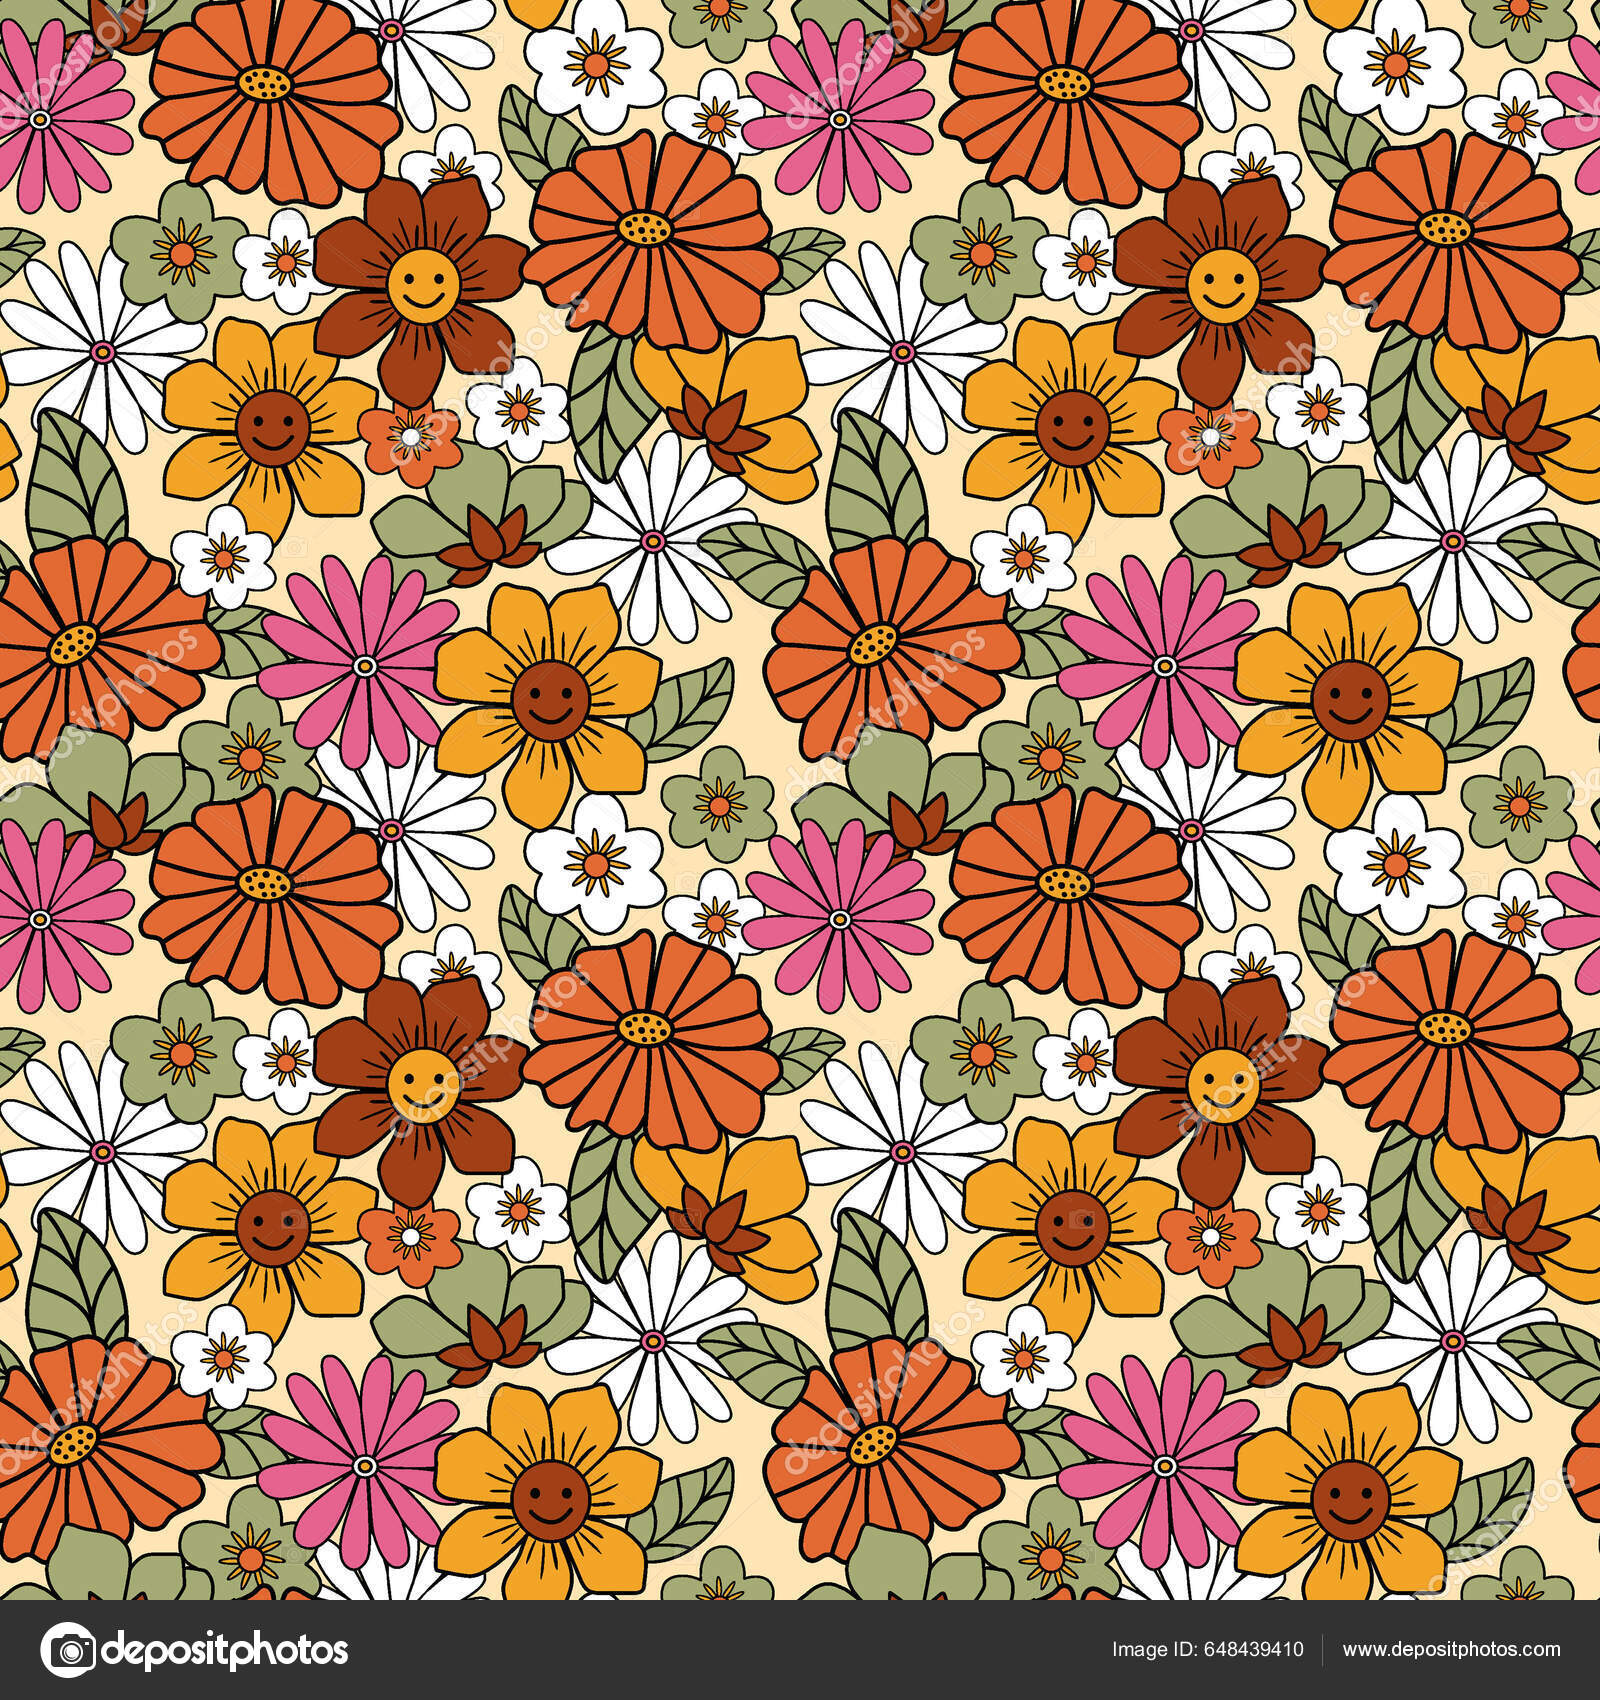 70s Floral Fabric, Wallpaper and Home Decor